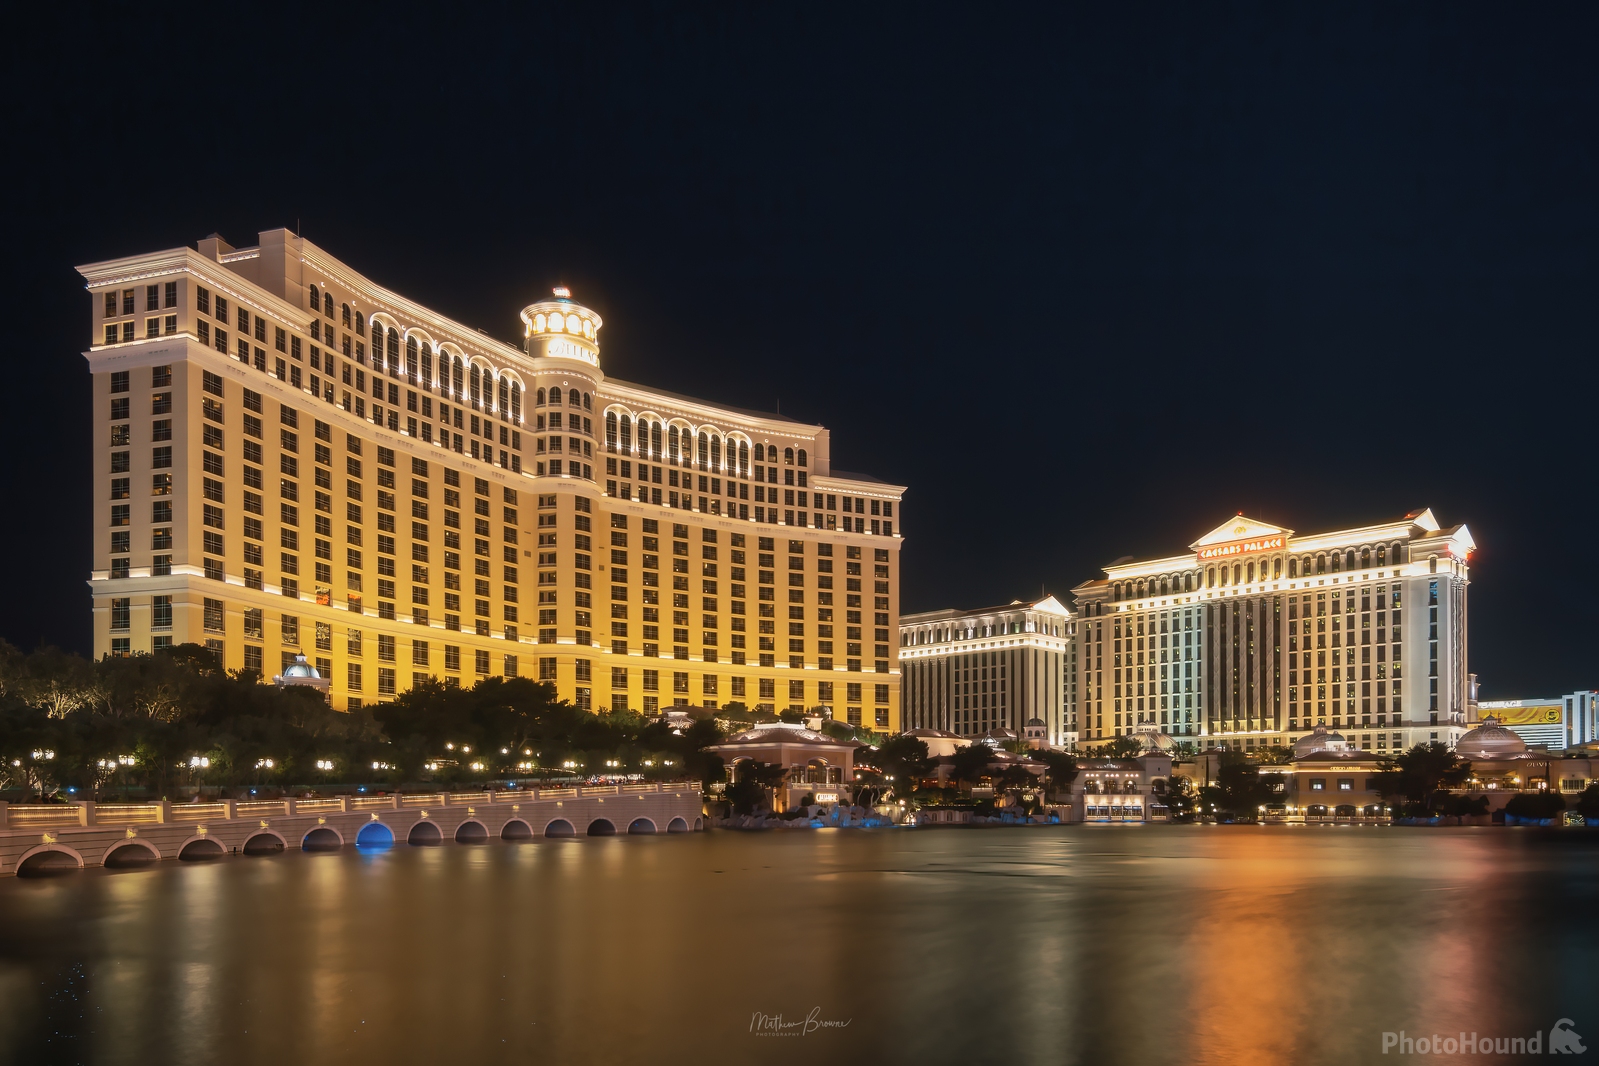 Image of Bellagio Fountains by Mathew Browne